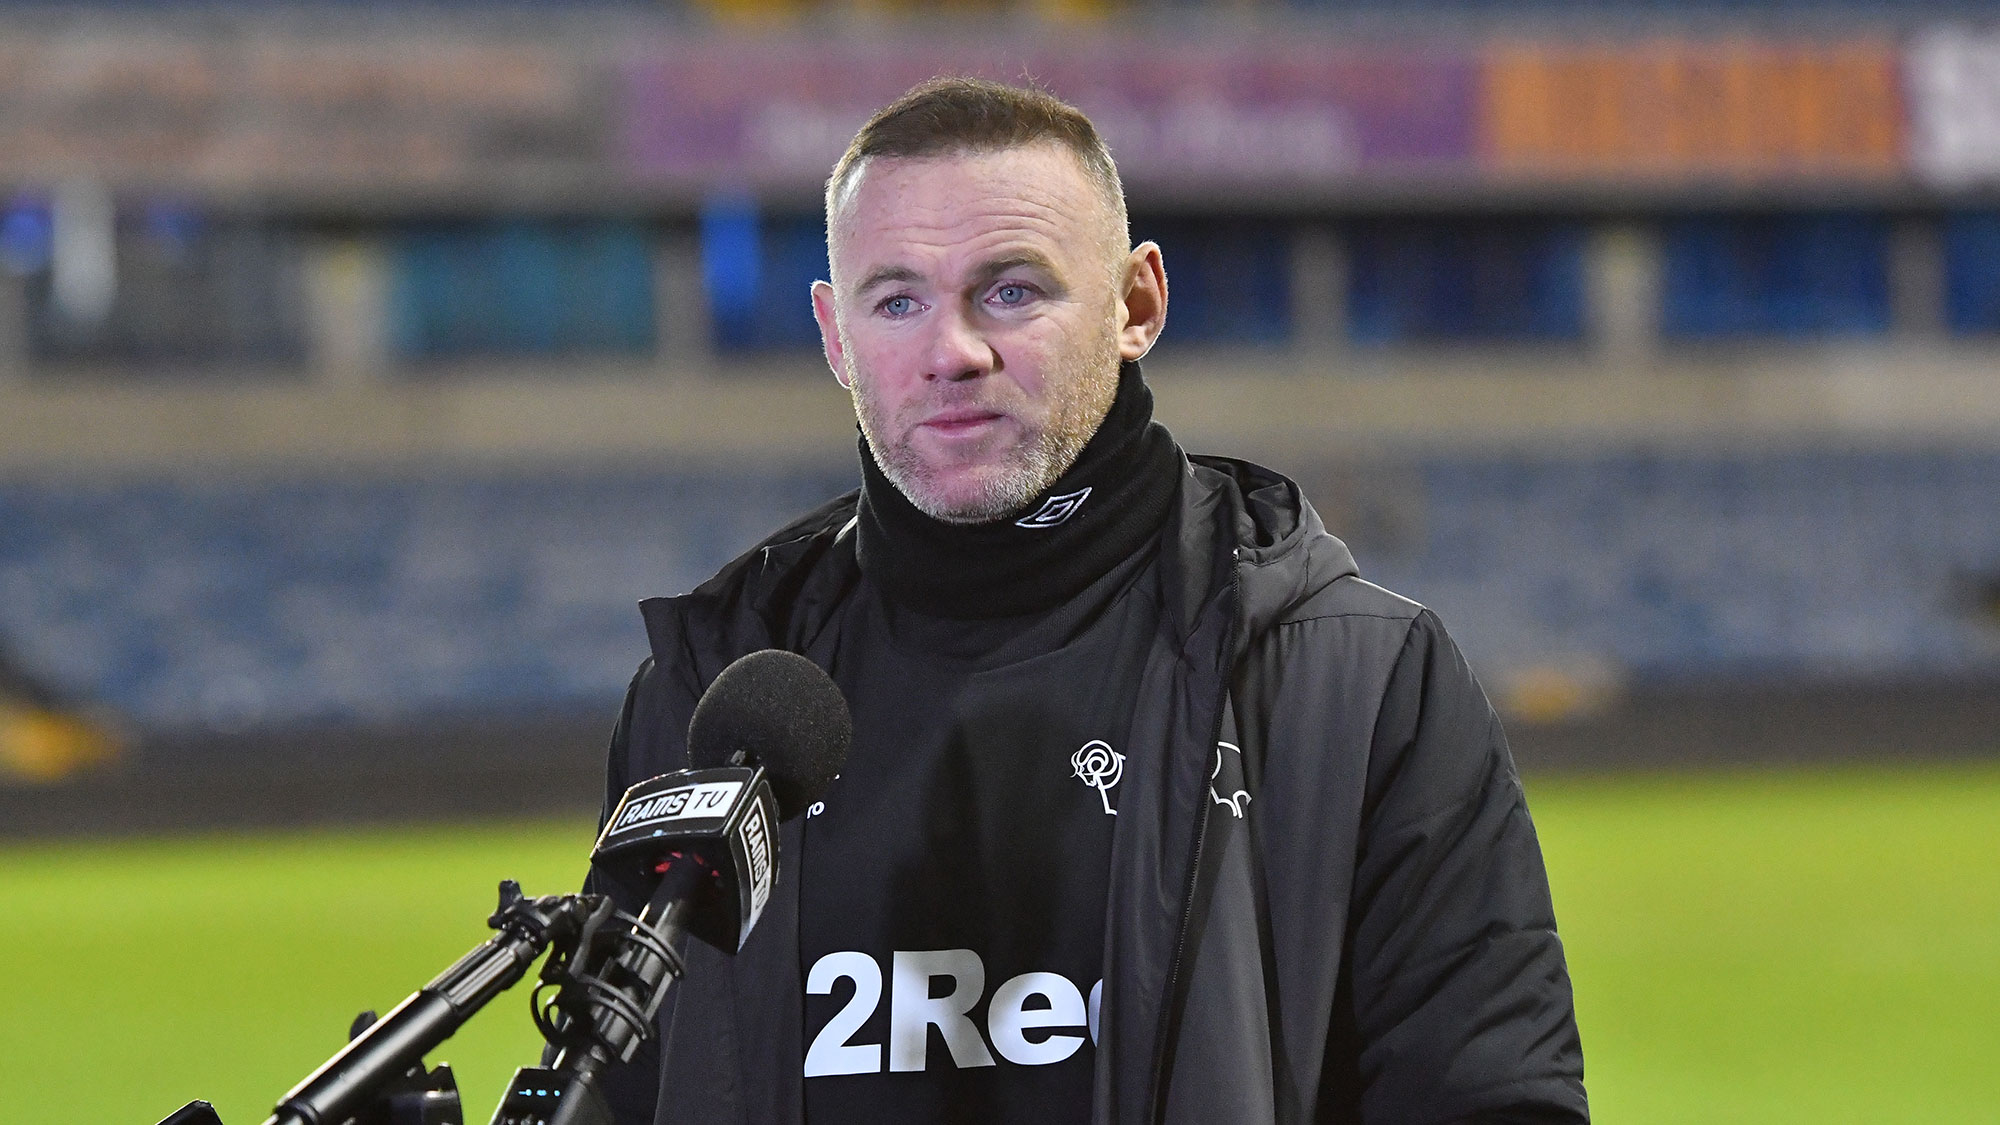 Wayne Rooney's first interview as Derby County manager (VIDEO) - Soccer